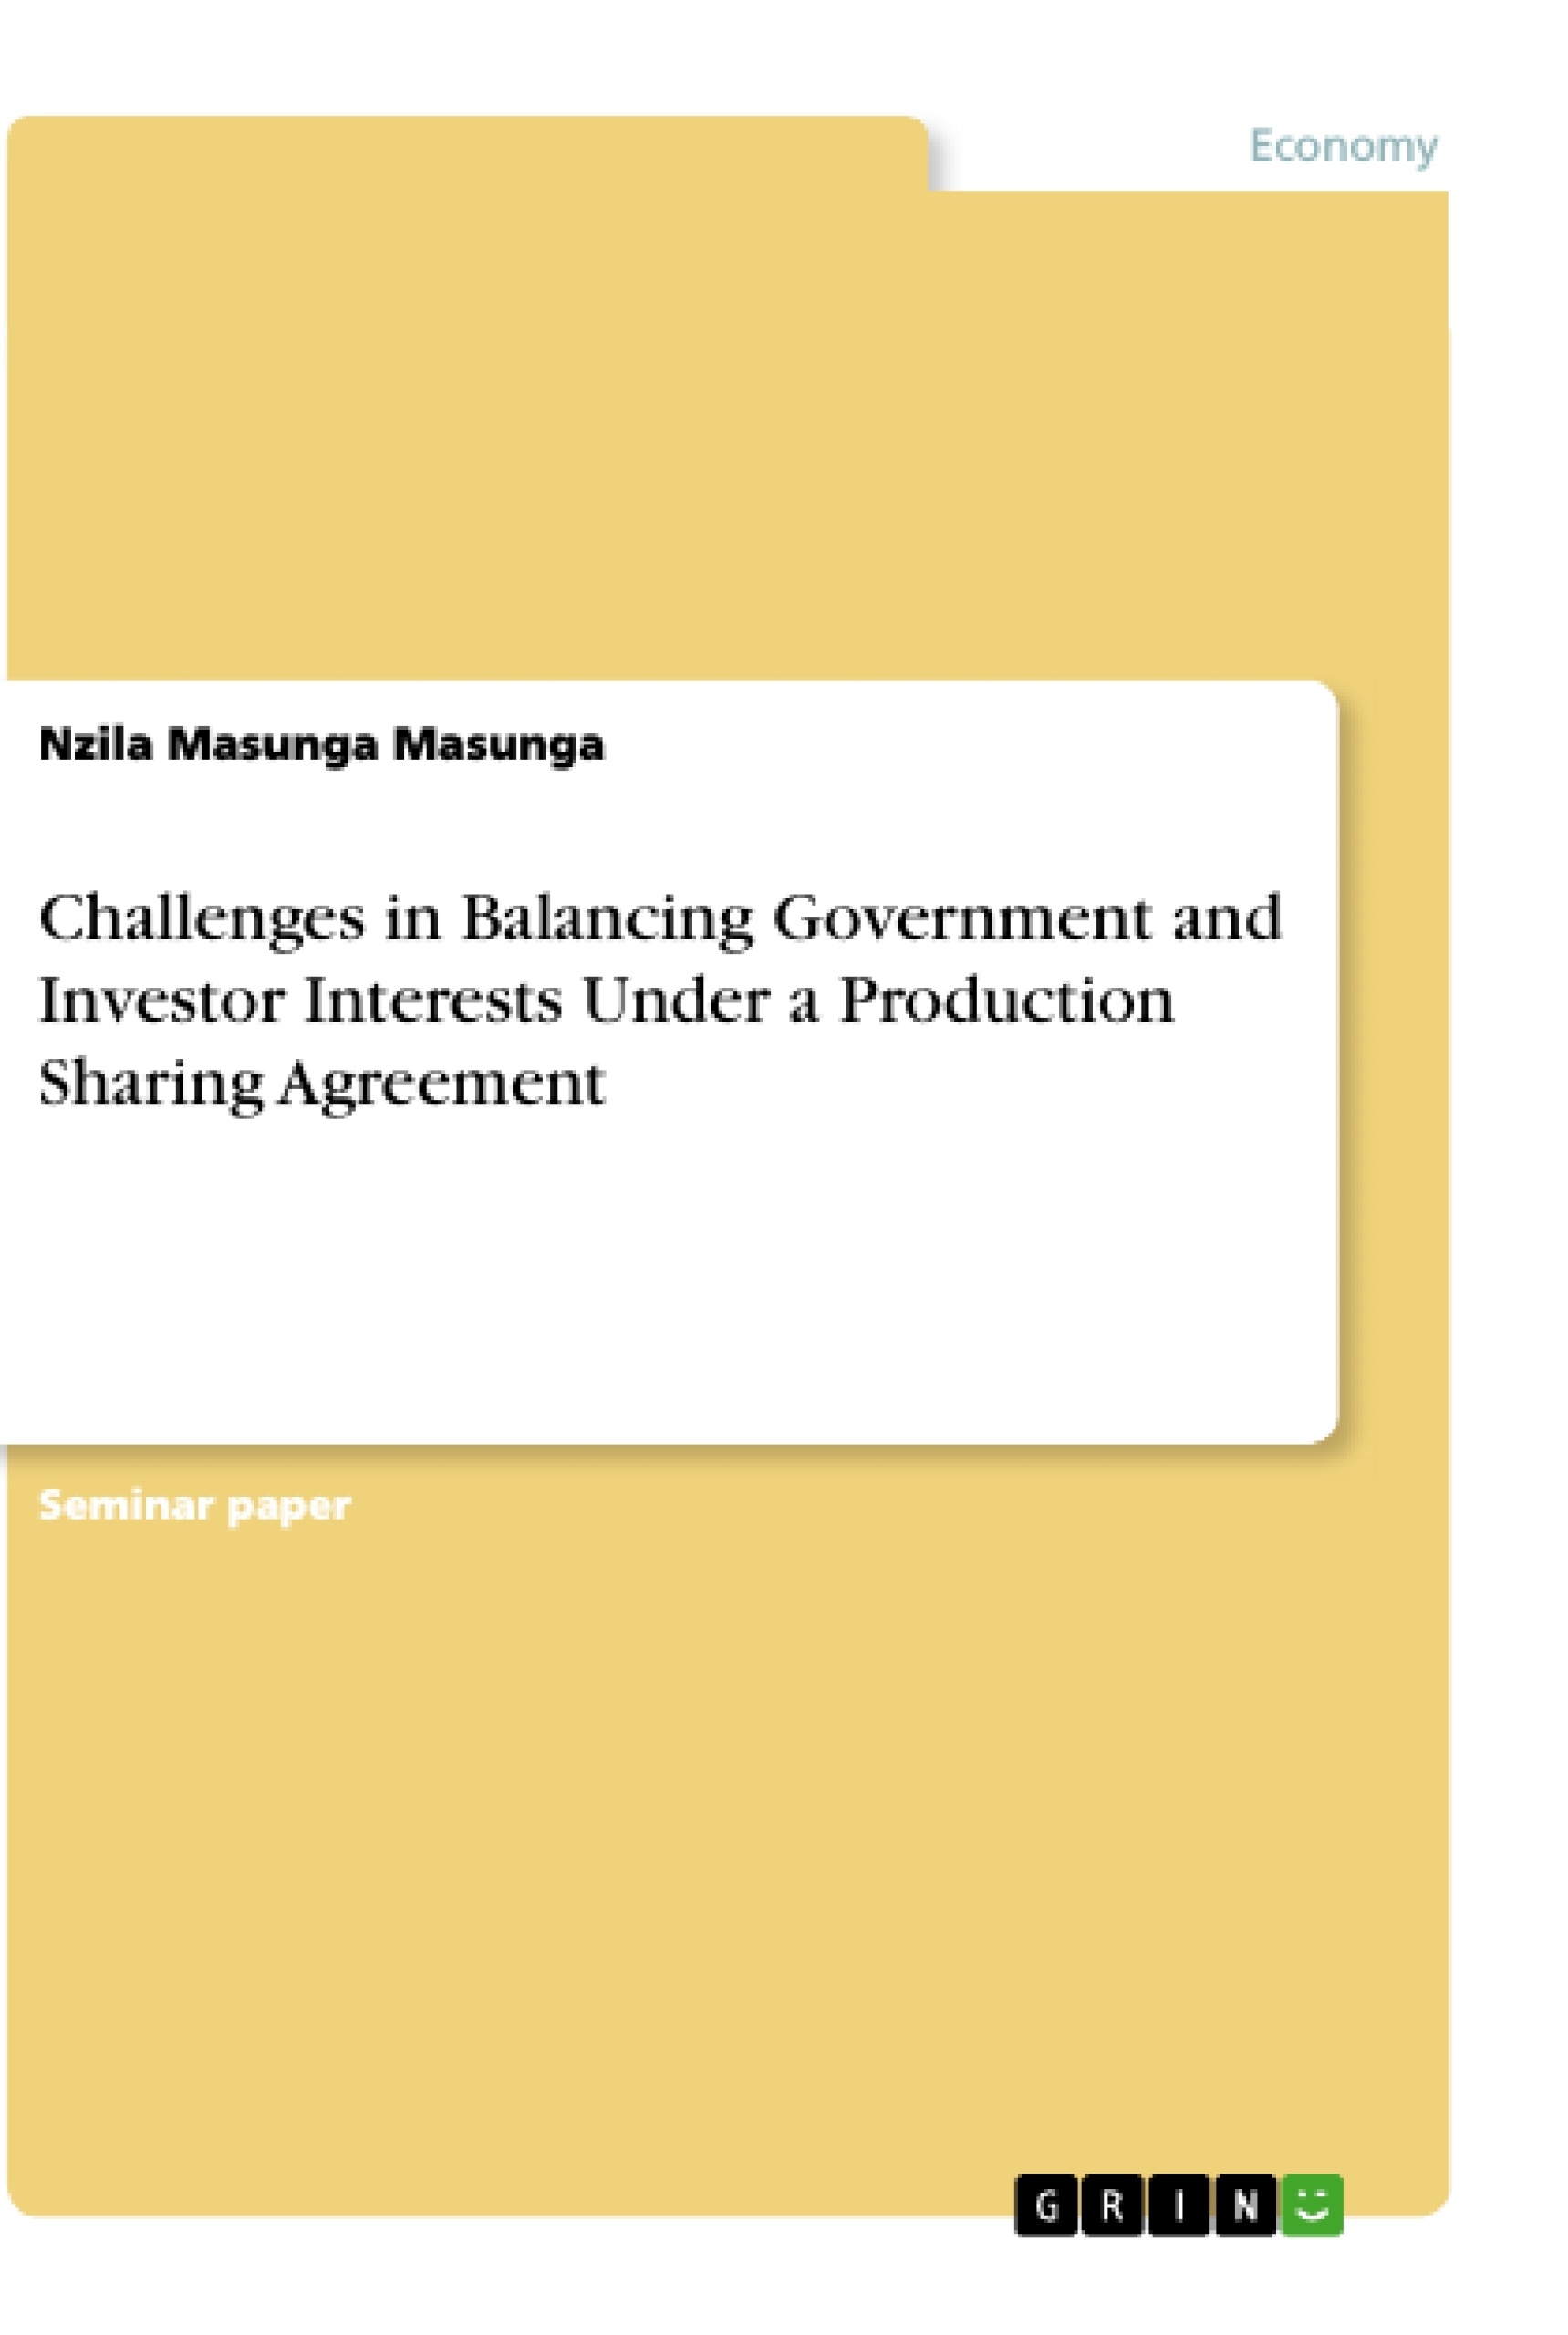 Titre: Challenges in Balancing Government and Investor Interests Under a Production Sharing Agreement